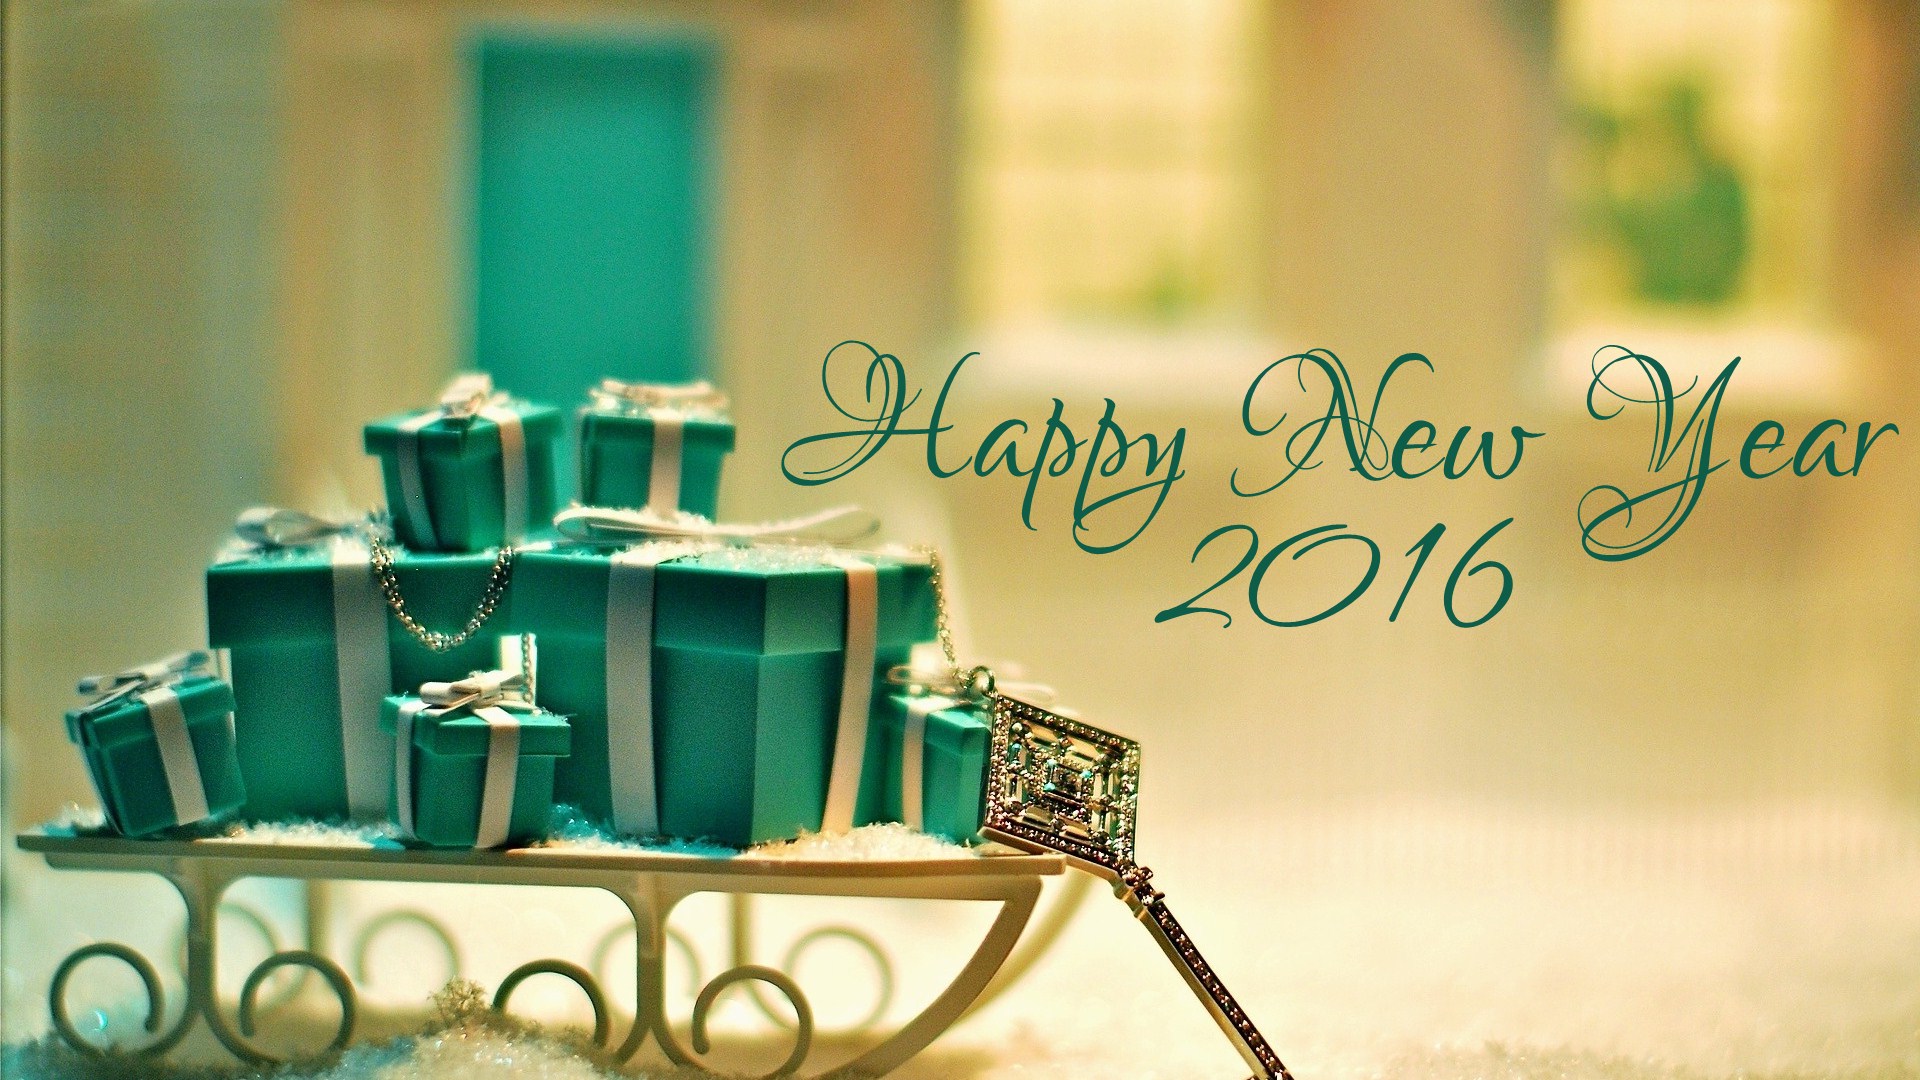 holiday, new year 2016, new year